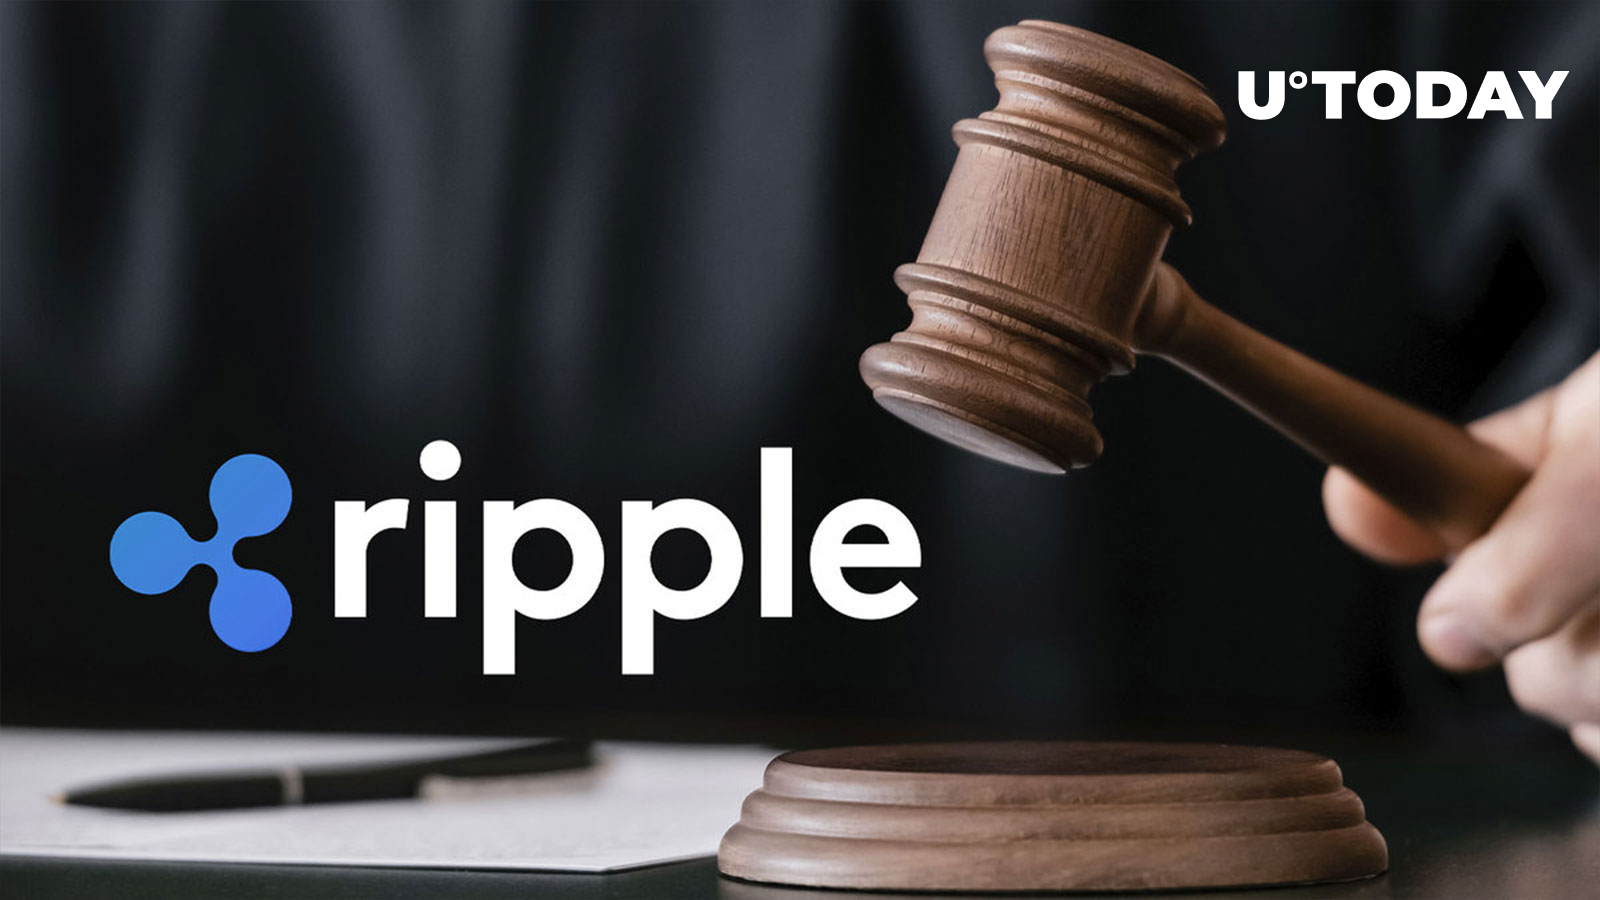 Ripple Ally Asks Court to Impose “Modest” Civil Penalty